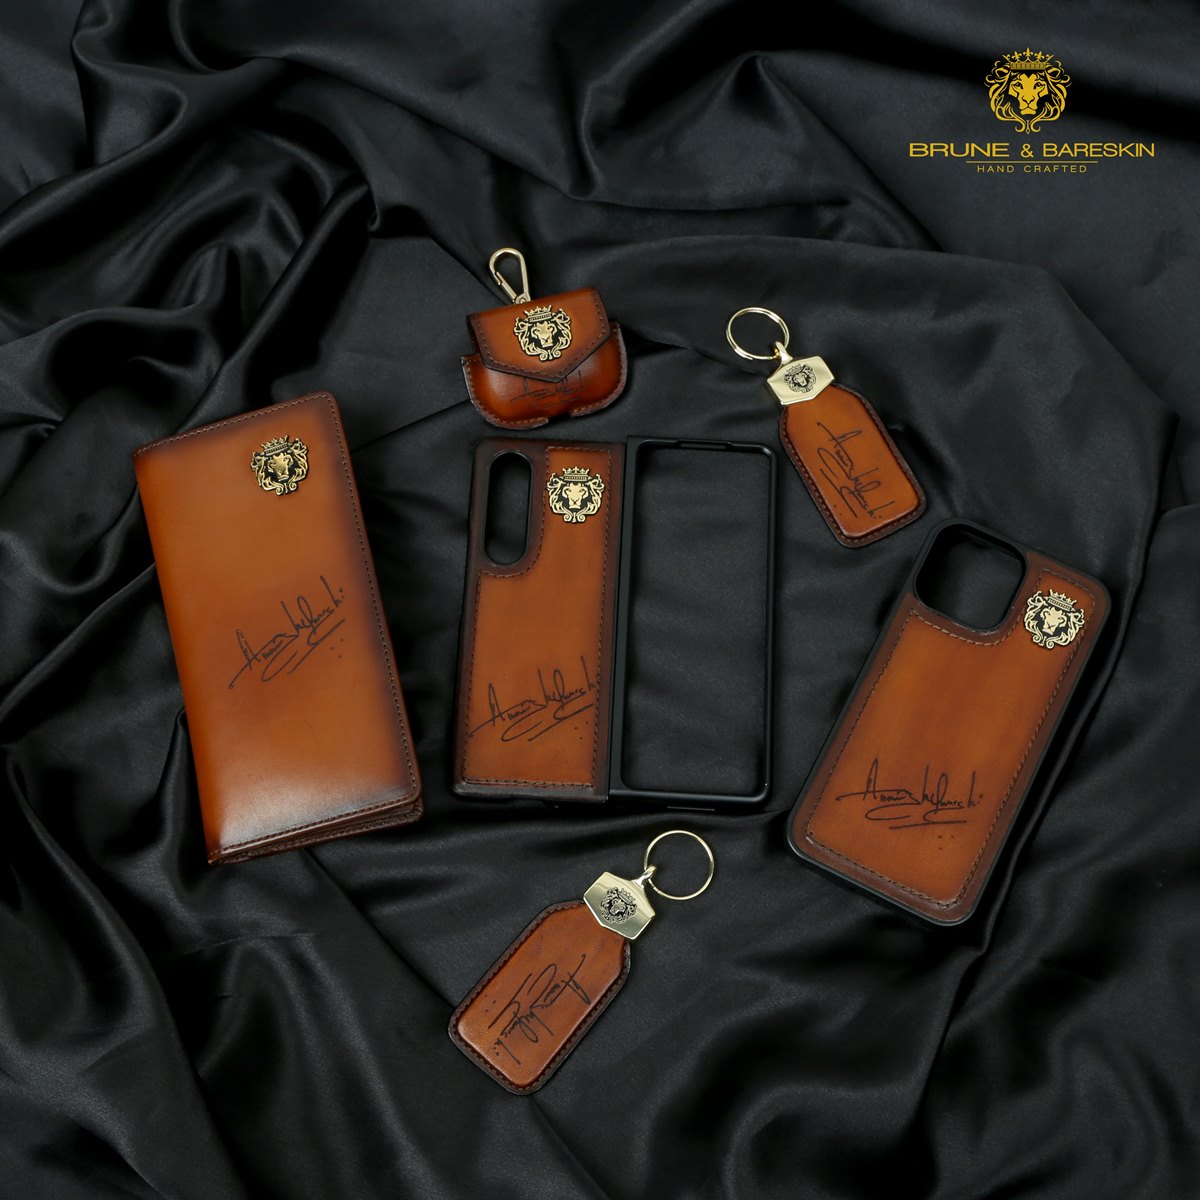 Bespoke Scritto Laser Combo Pack of Mobile Cover, Key Chain, Airpod Cover and Leather Long Wallet By Brune & Bareskin